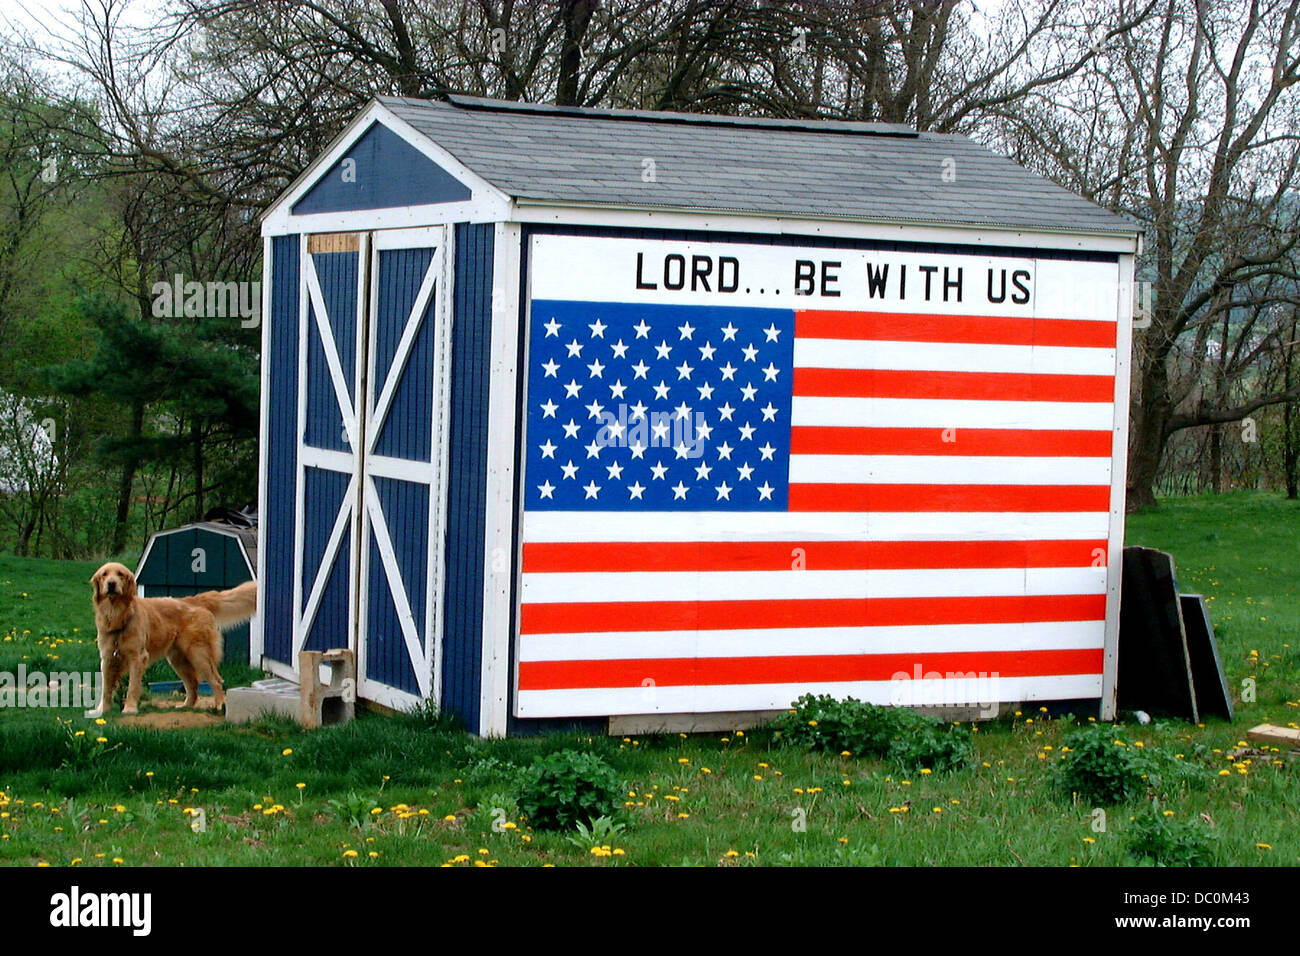 USA FLAG AND LORD BE WITH US SIGN ON SIDE OF TOOL SHED Stock Photo